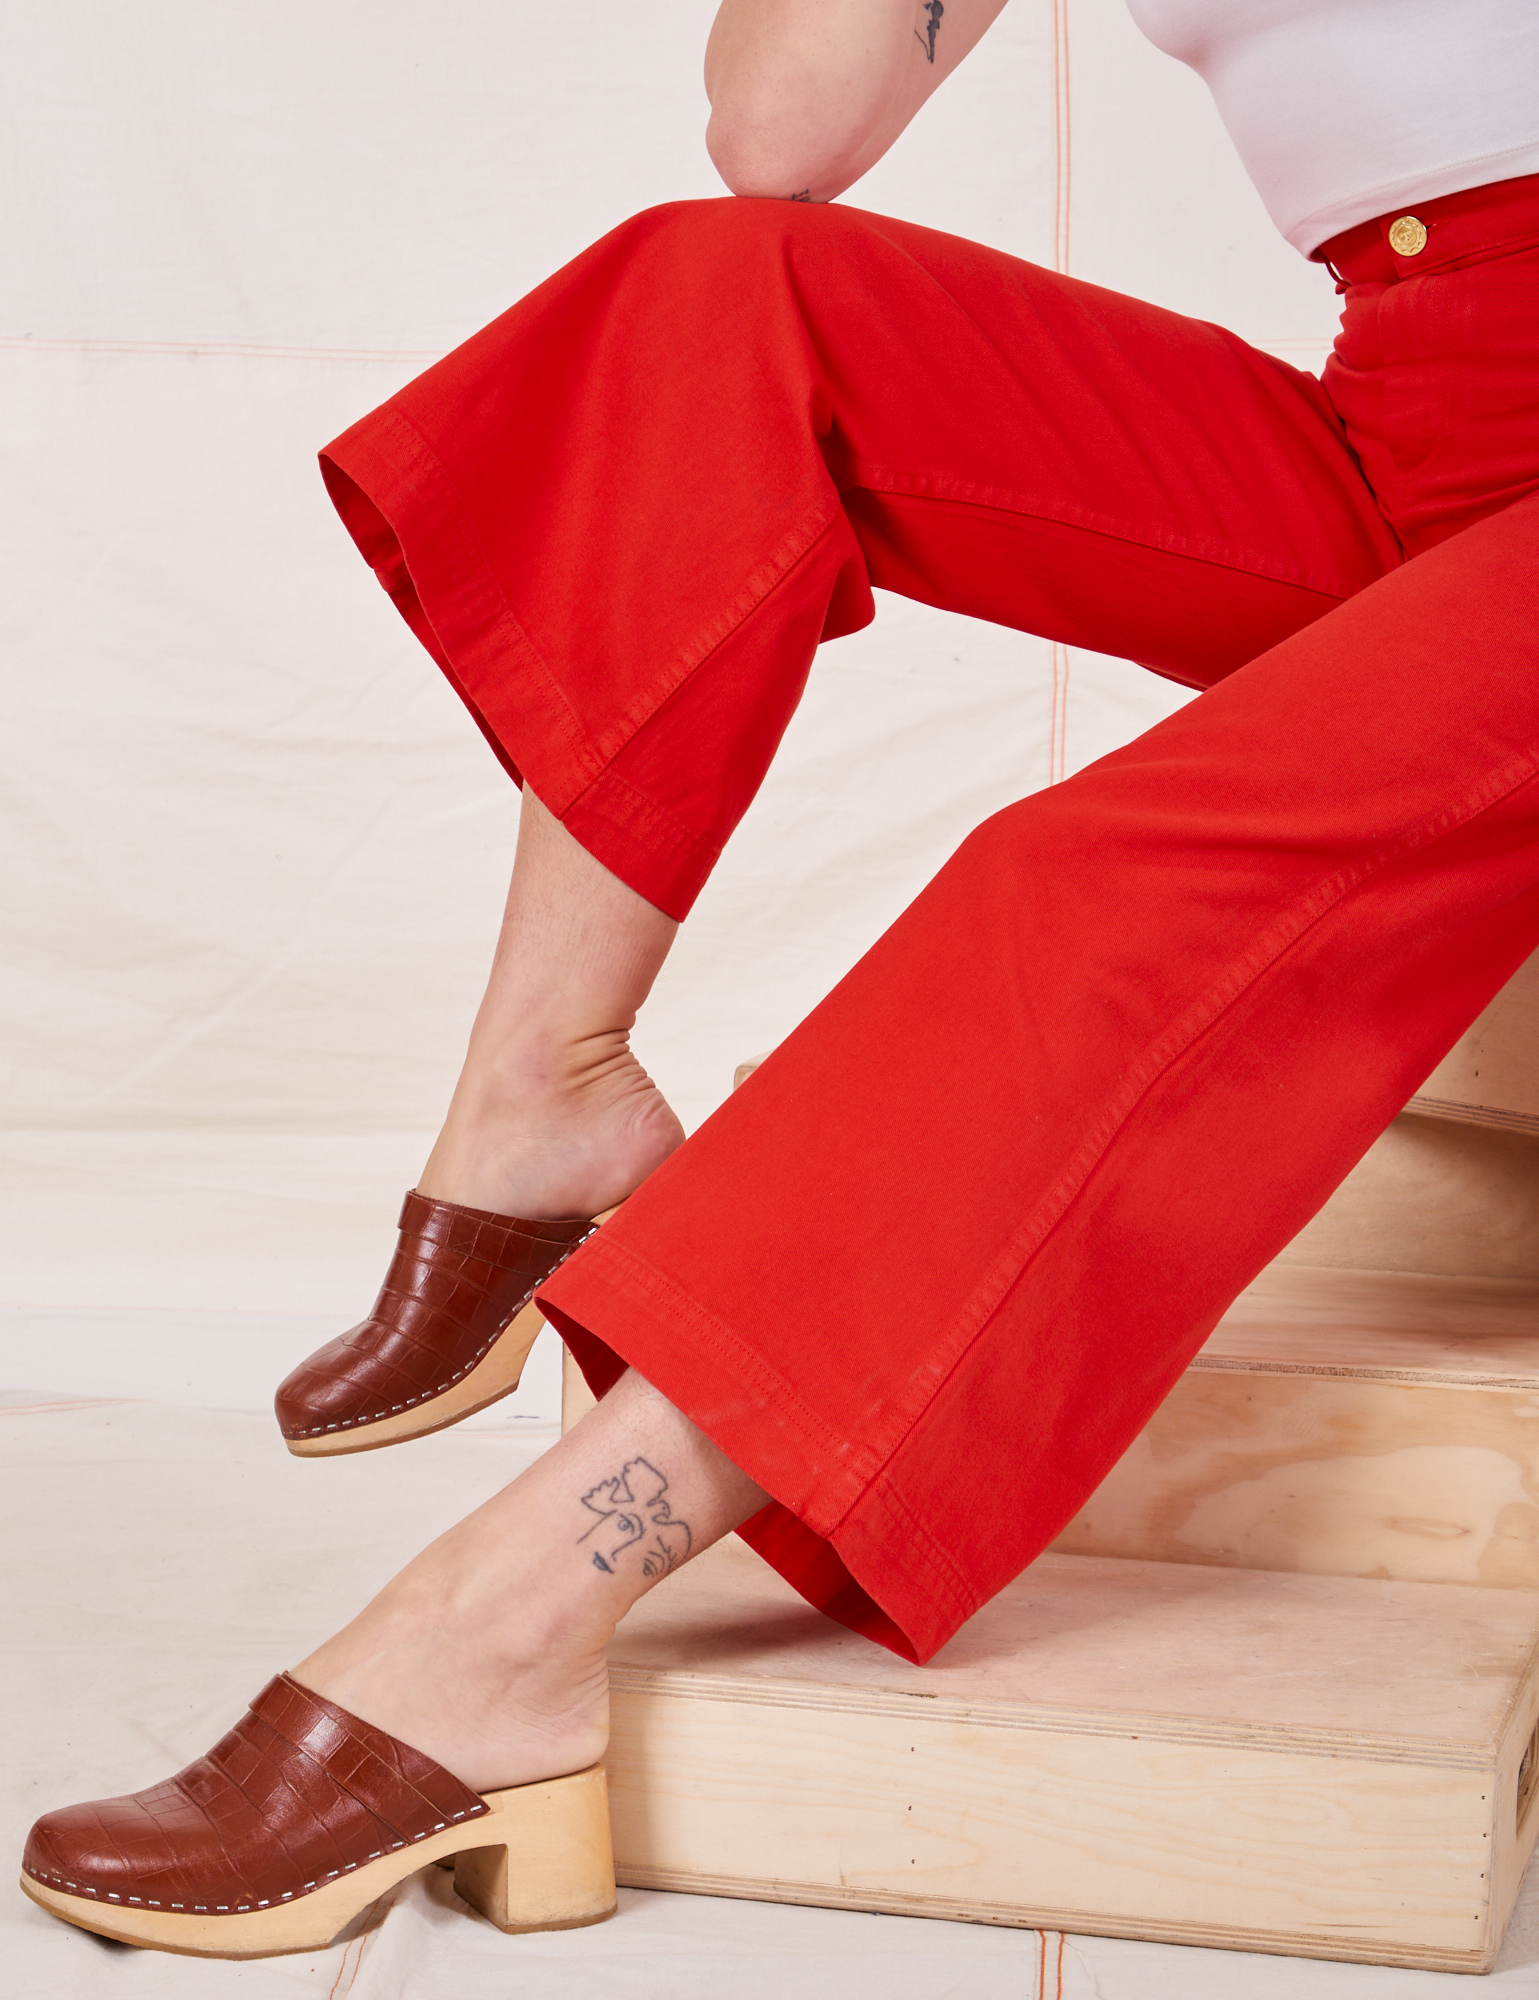 Bell Bottoms in Mustang Red pant leg close up on Alex